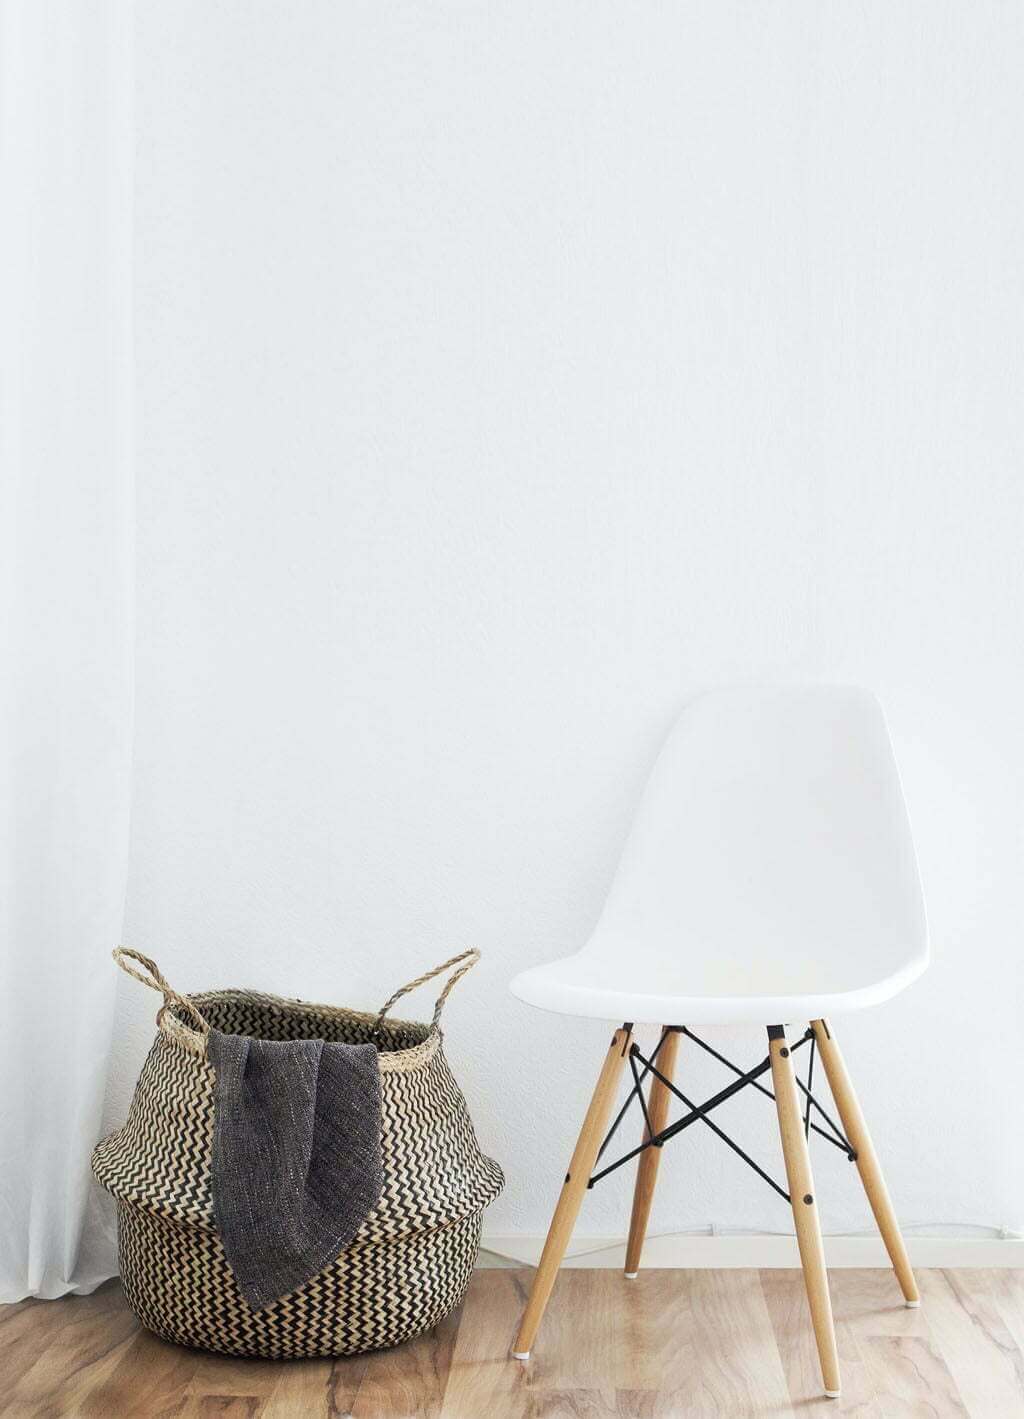 blank wall with chair and basket in foreground